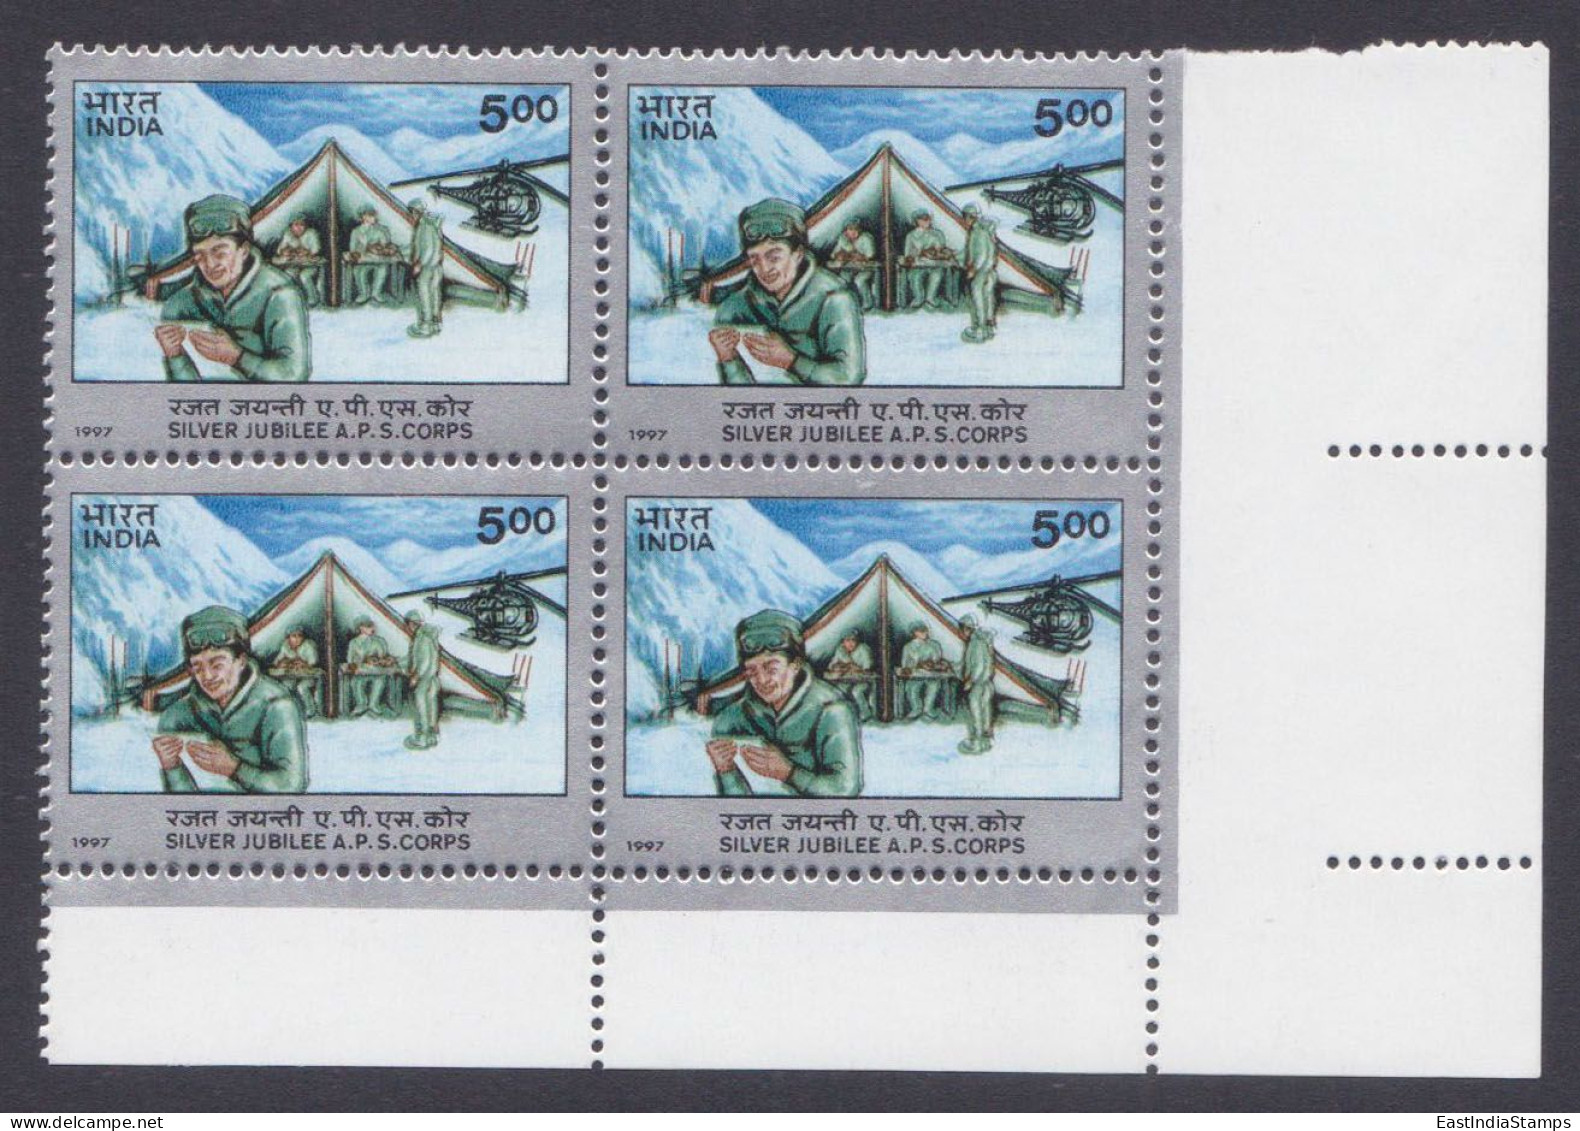 Inde India 1997 MNH A.P.S Army Postal Service Corps, Military, Armed Forces, Mountain, Snow, Helicopter, Mountains Block - Unused Stamps